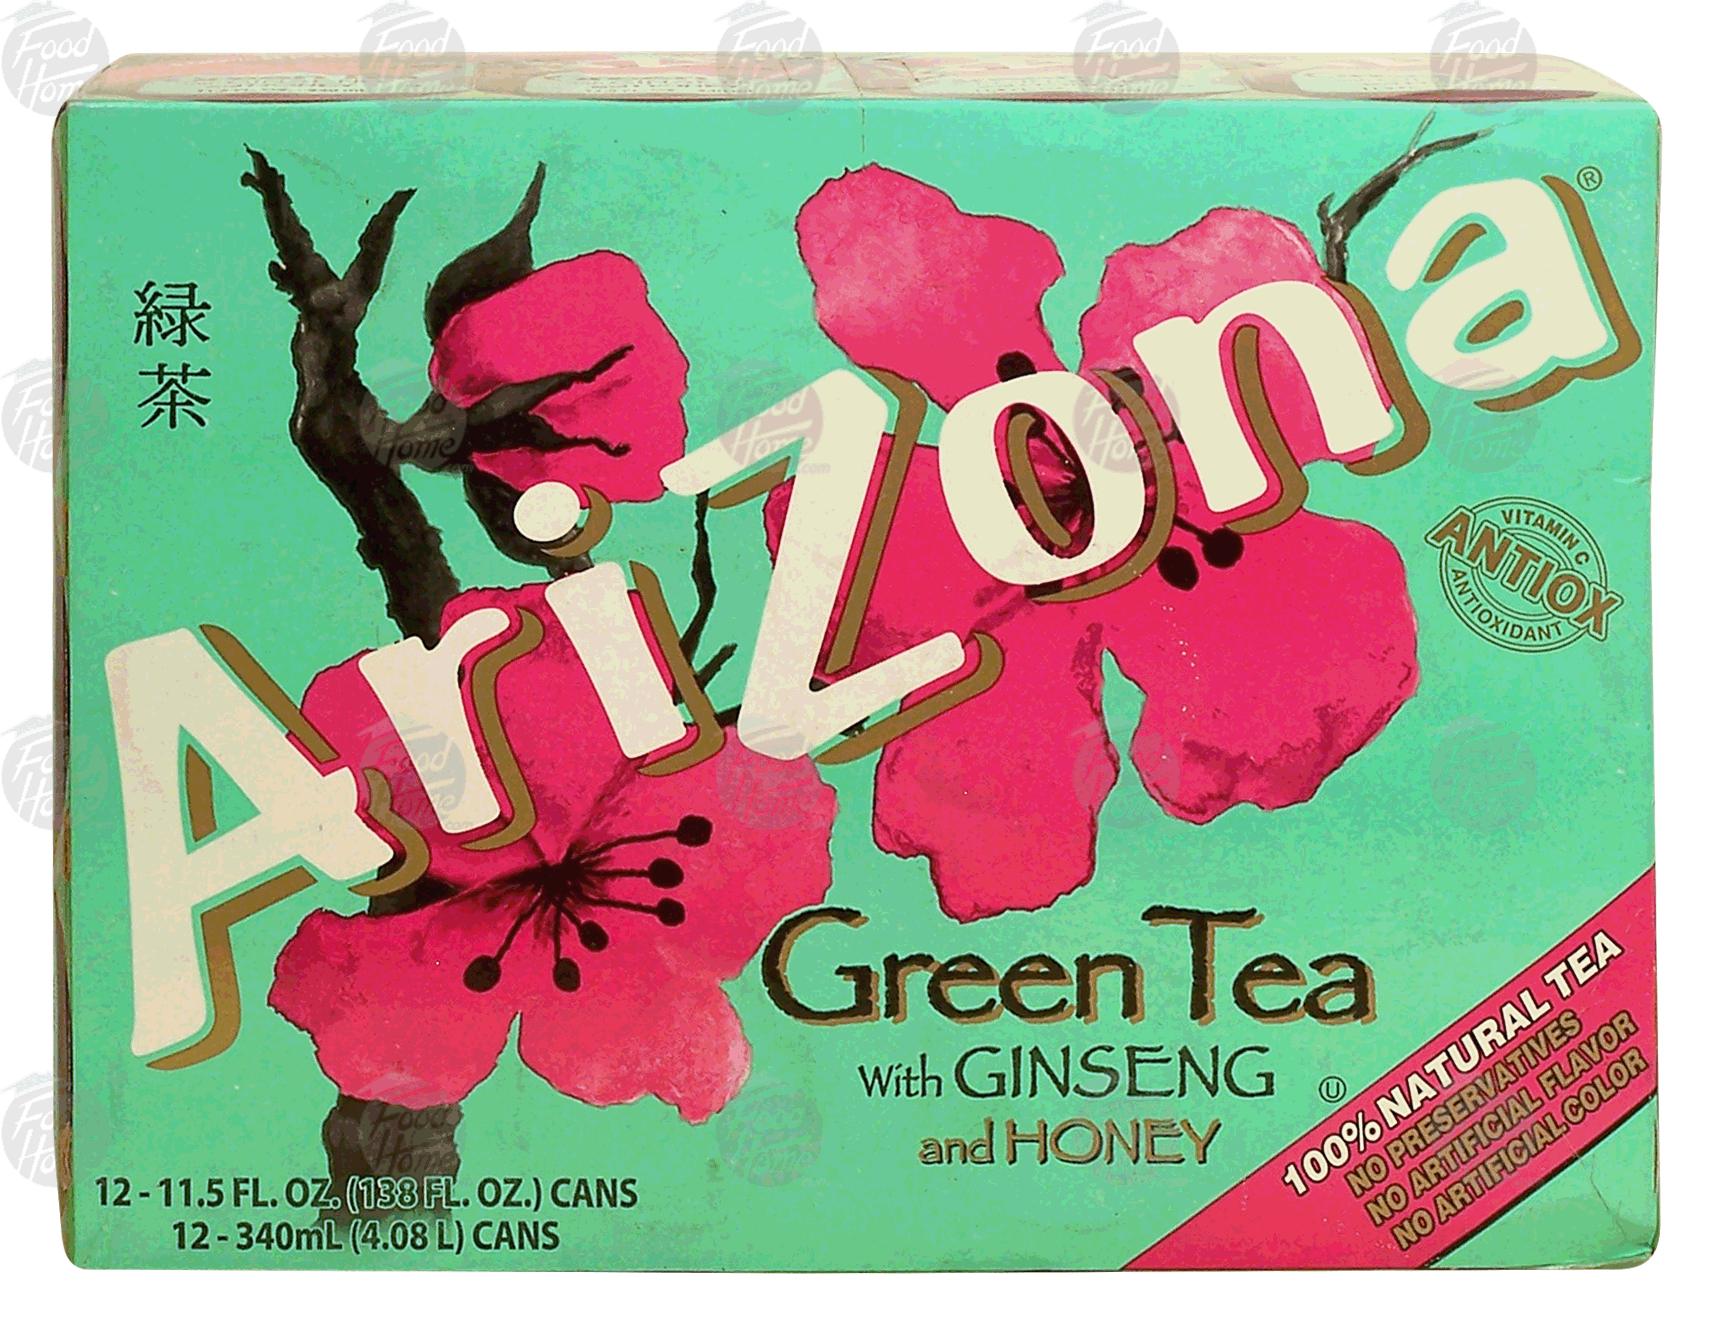 Arizona  green tea with ginseng and honey, 11.5-fl. oz. cans Full-Size Picture